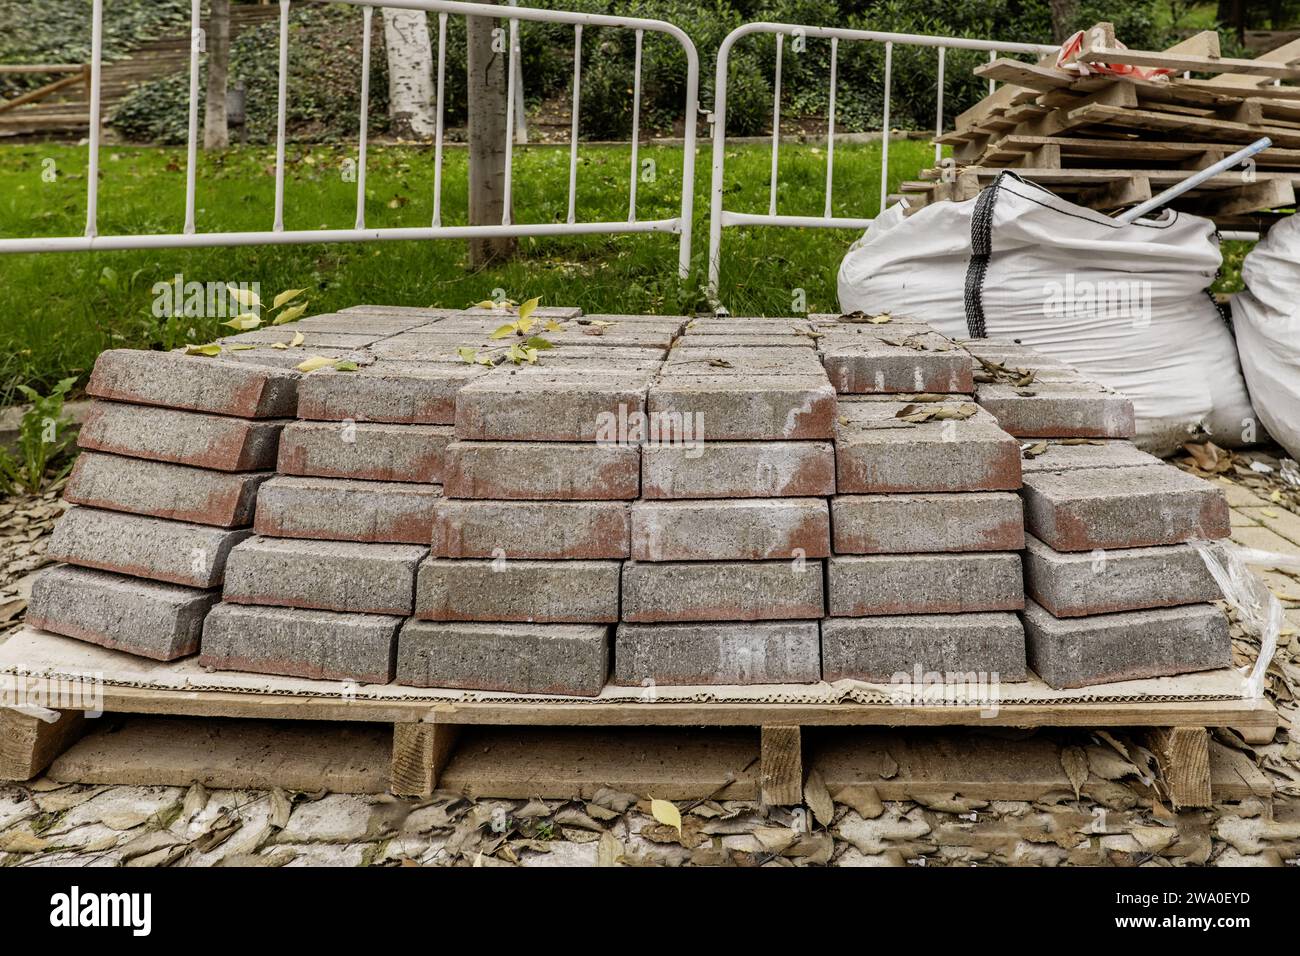 A pallet of paving stones to pave open streets in the middle of a garden Stock Photo